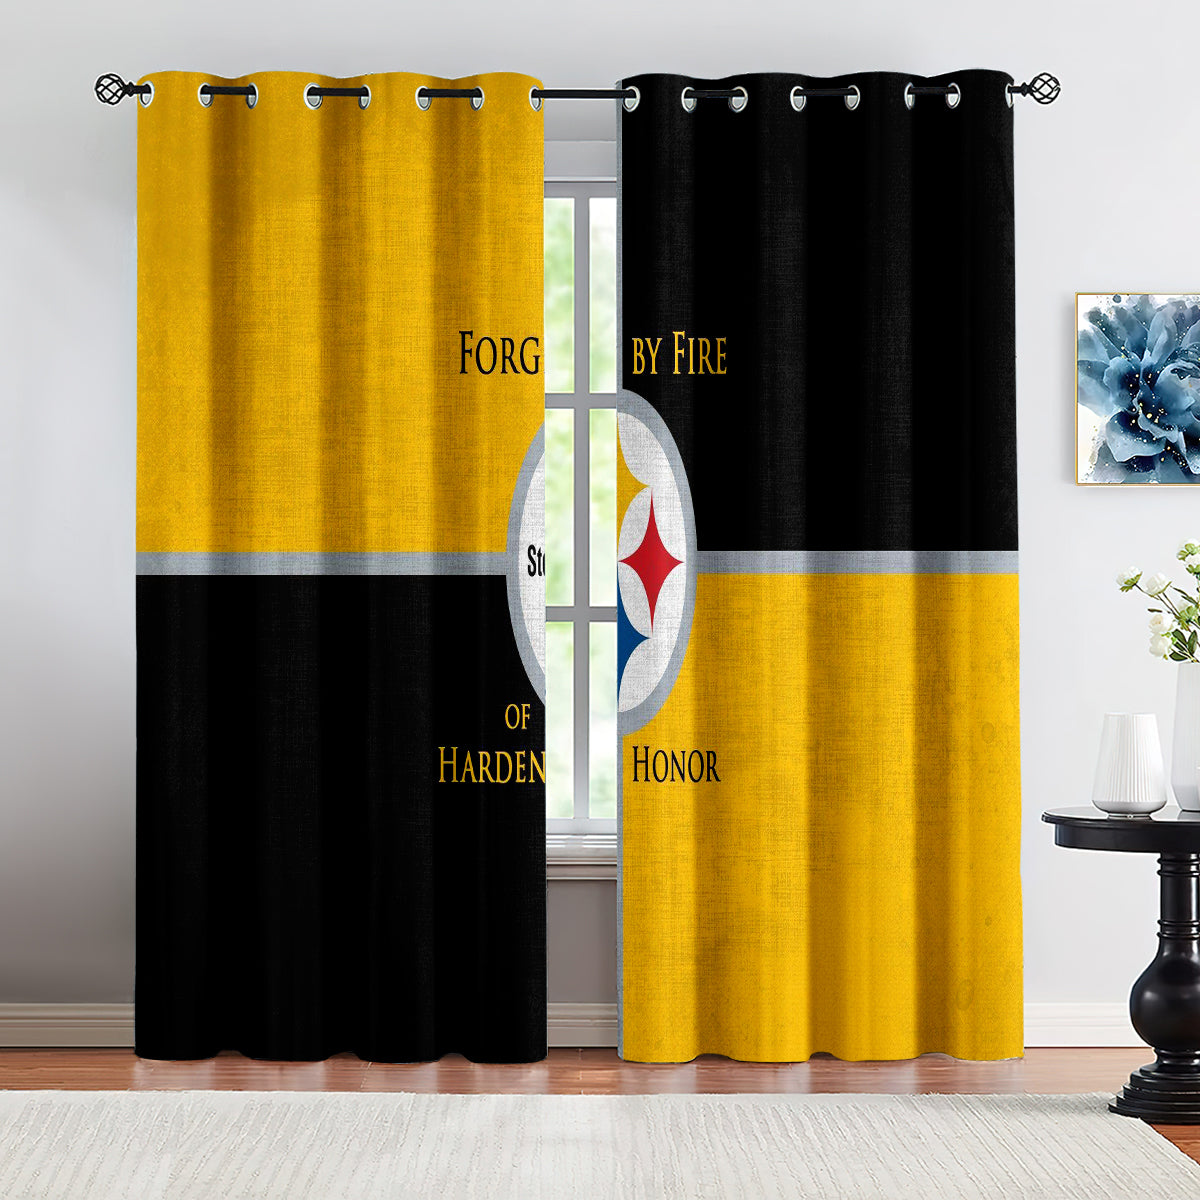 Pittsburgh Steelers Football Team Blackout Curtains Drapes For Window Treatment Set